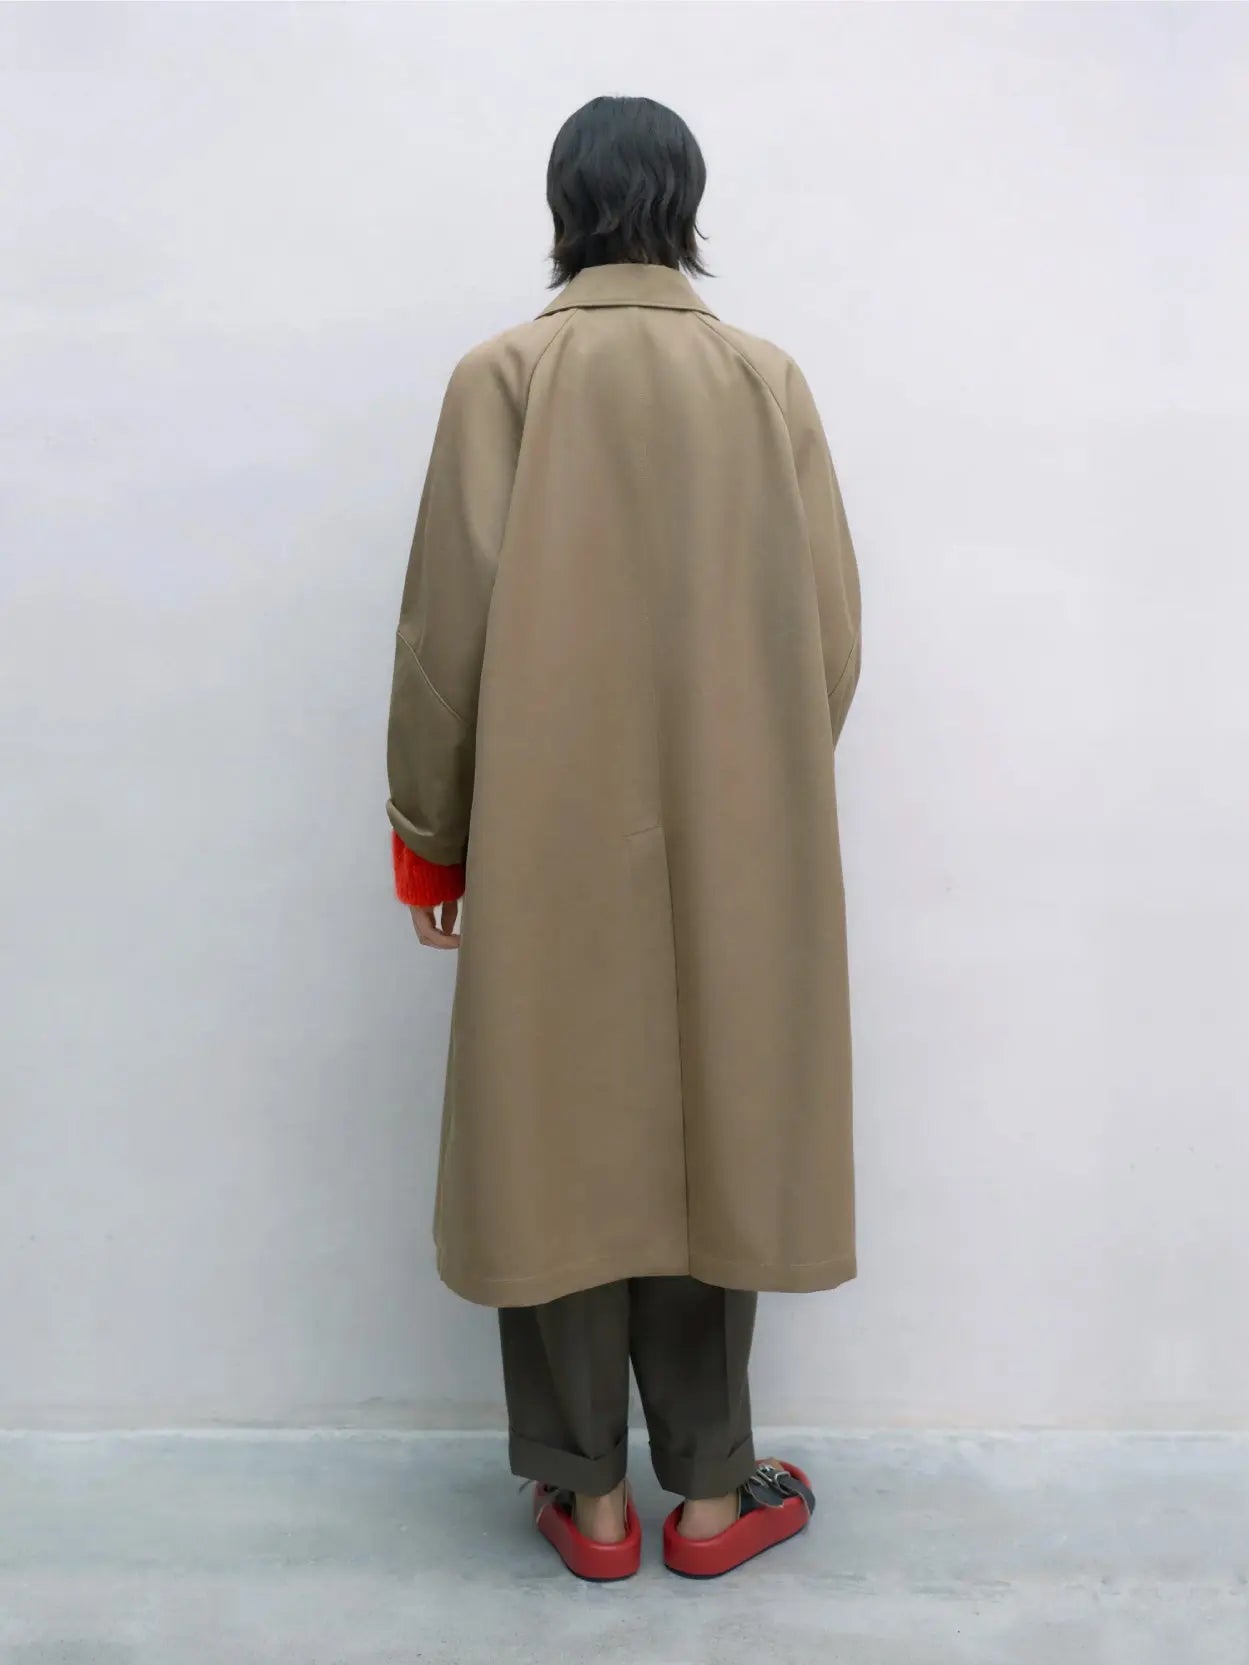 A long beige Trench Coat Camel with a collared neckline, designed for a straight fit. It features long sleeves, two front flap pockets, and a concealed front button closure. Available at Bassalstore in Barcelona, the label tag at the neckline reads "Cordera.